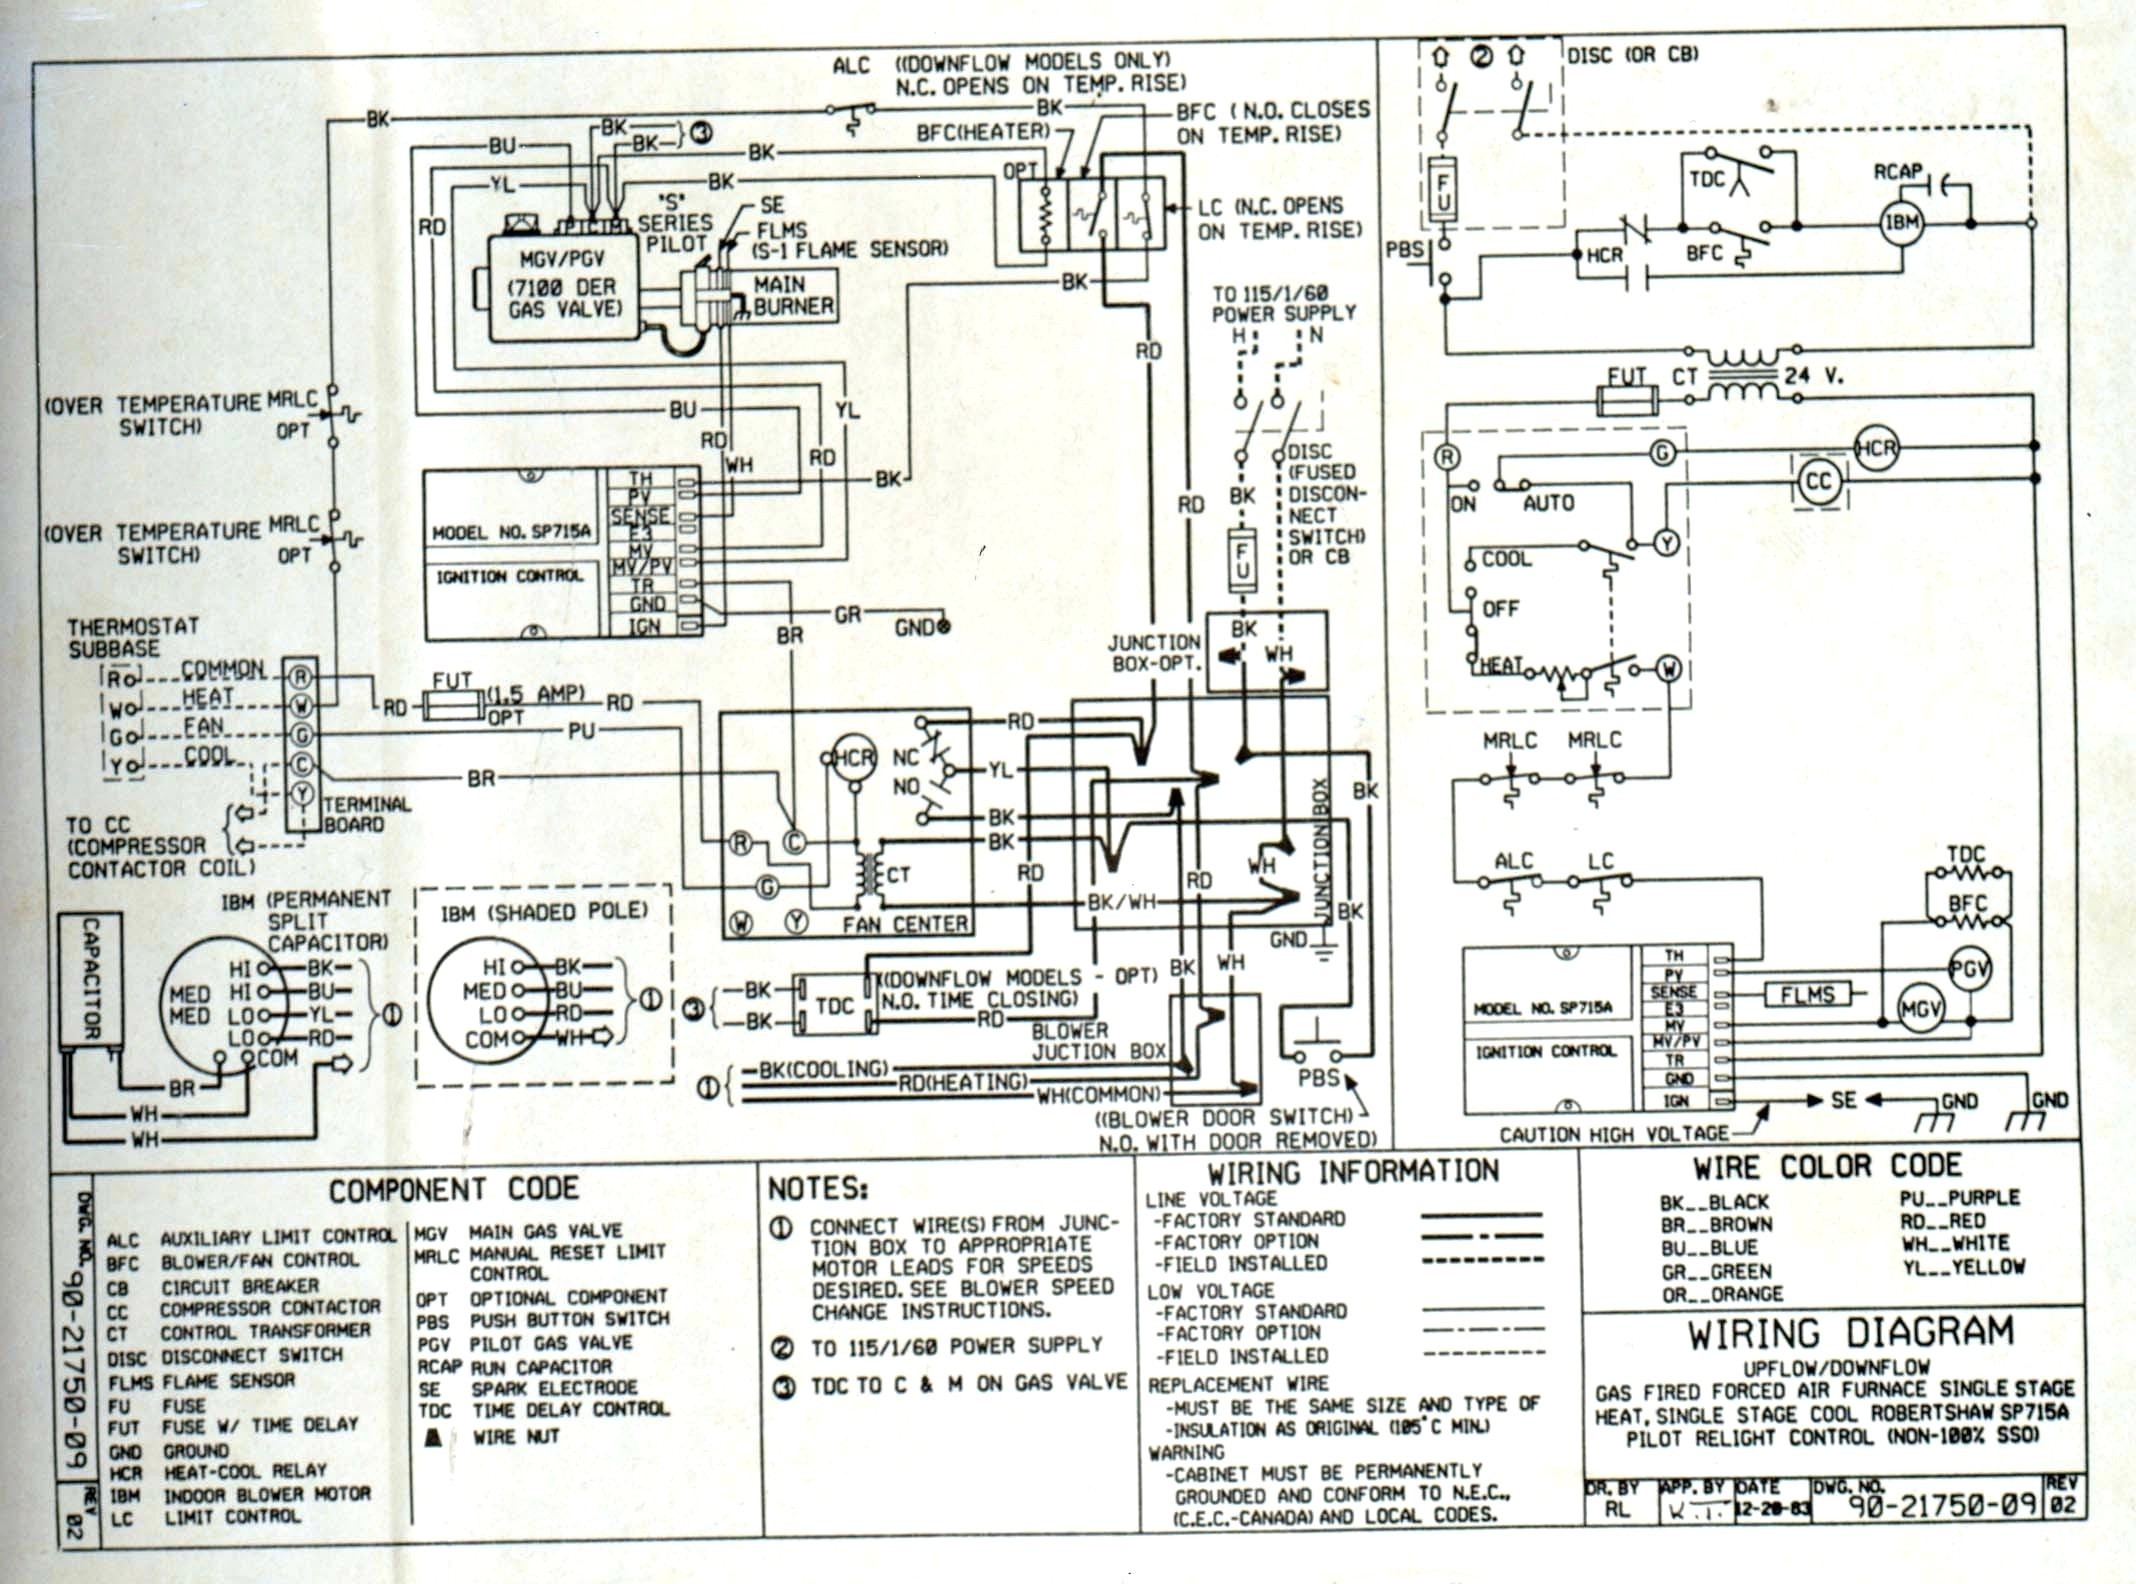 How to Read A Wiring Diagram for Hvac Valid Wiring Diagram Symbols for Hvac Best Reading